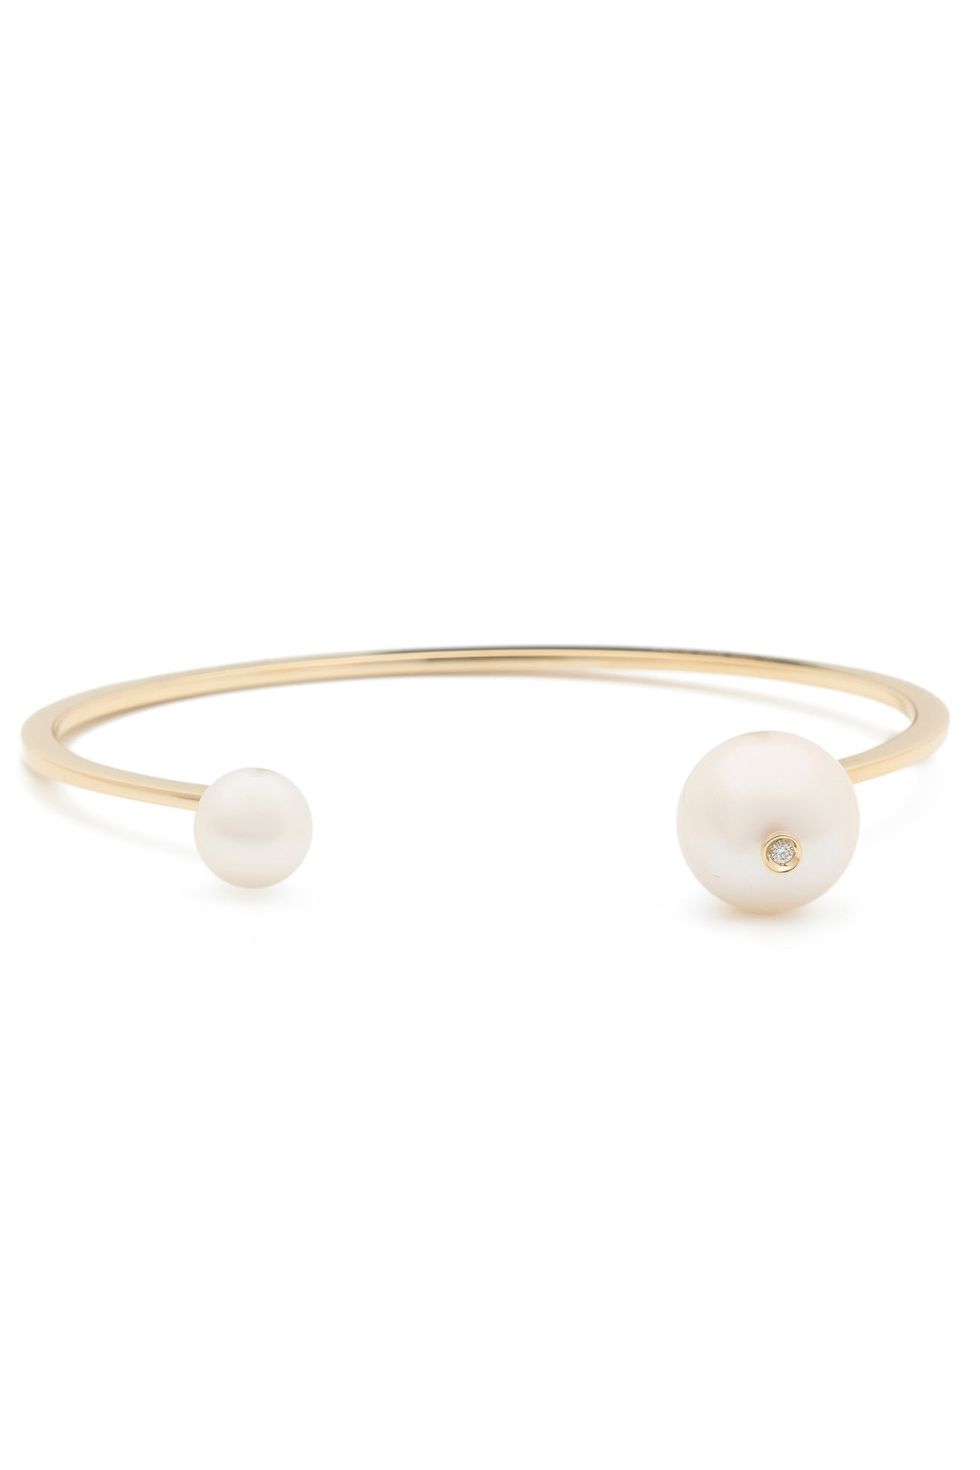 Pearl, Jewellery, Fashion accessory, Bracelet, Beige, Bangle, Gemstone, Silver, Metal, Natural material, 